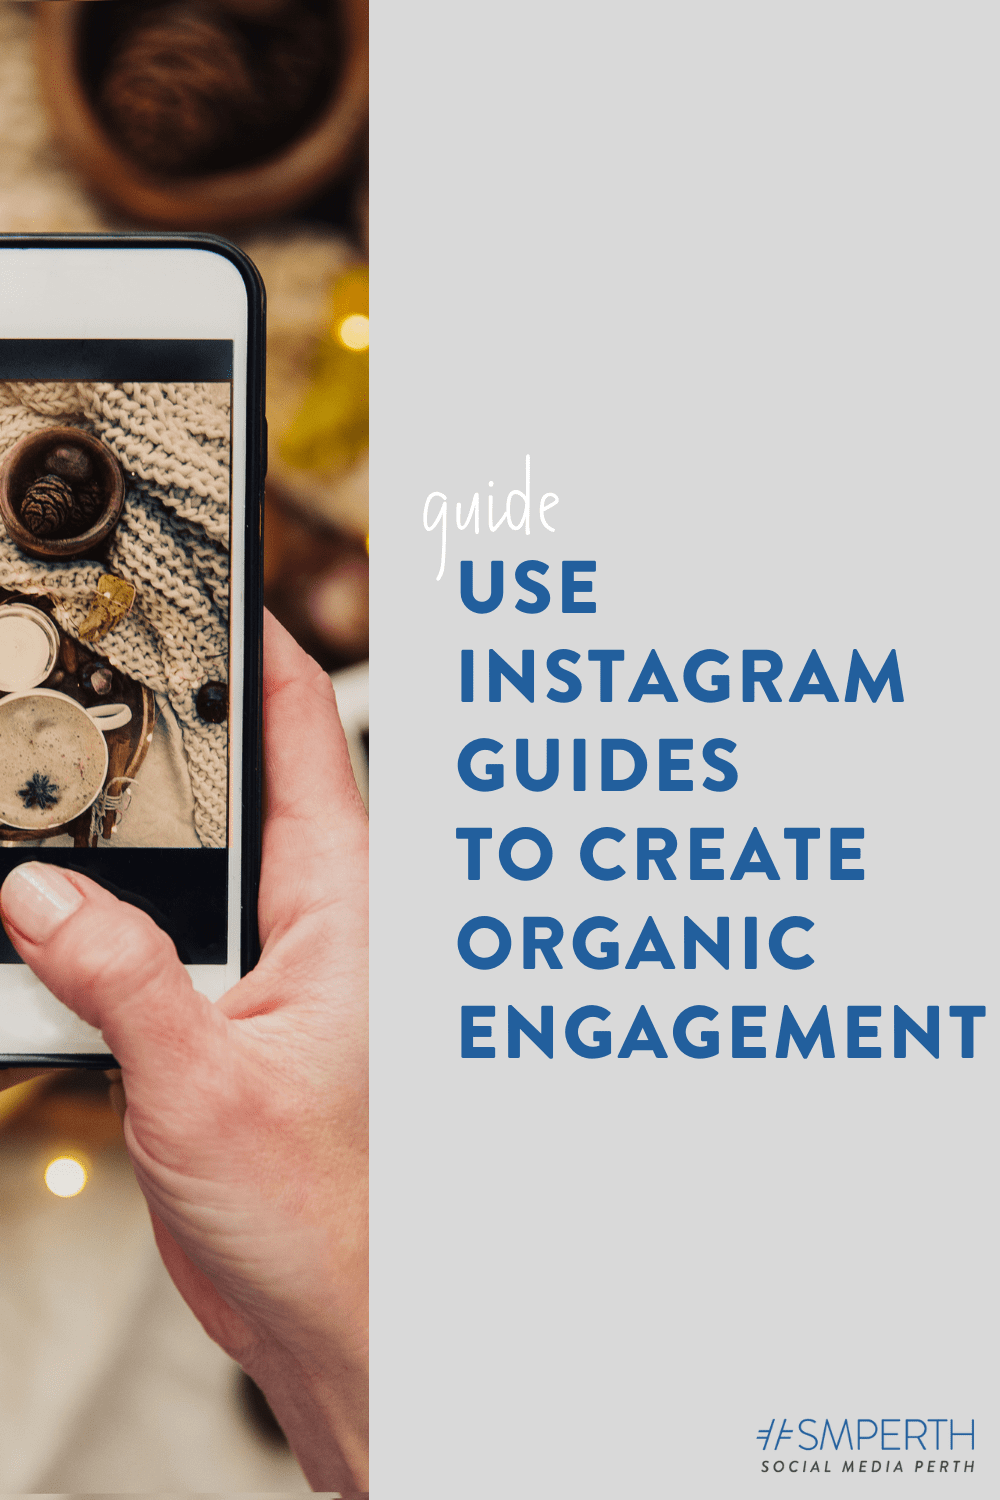 Use Instagram Guides to create organic engagement